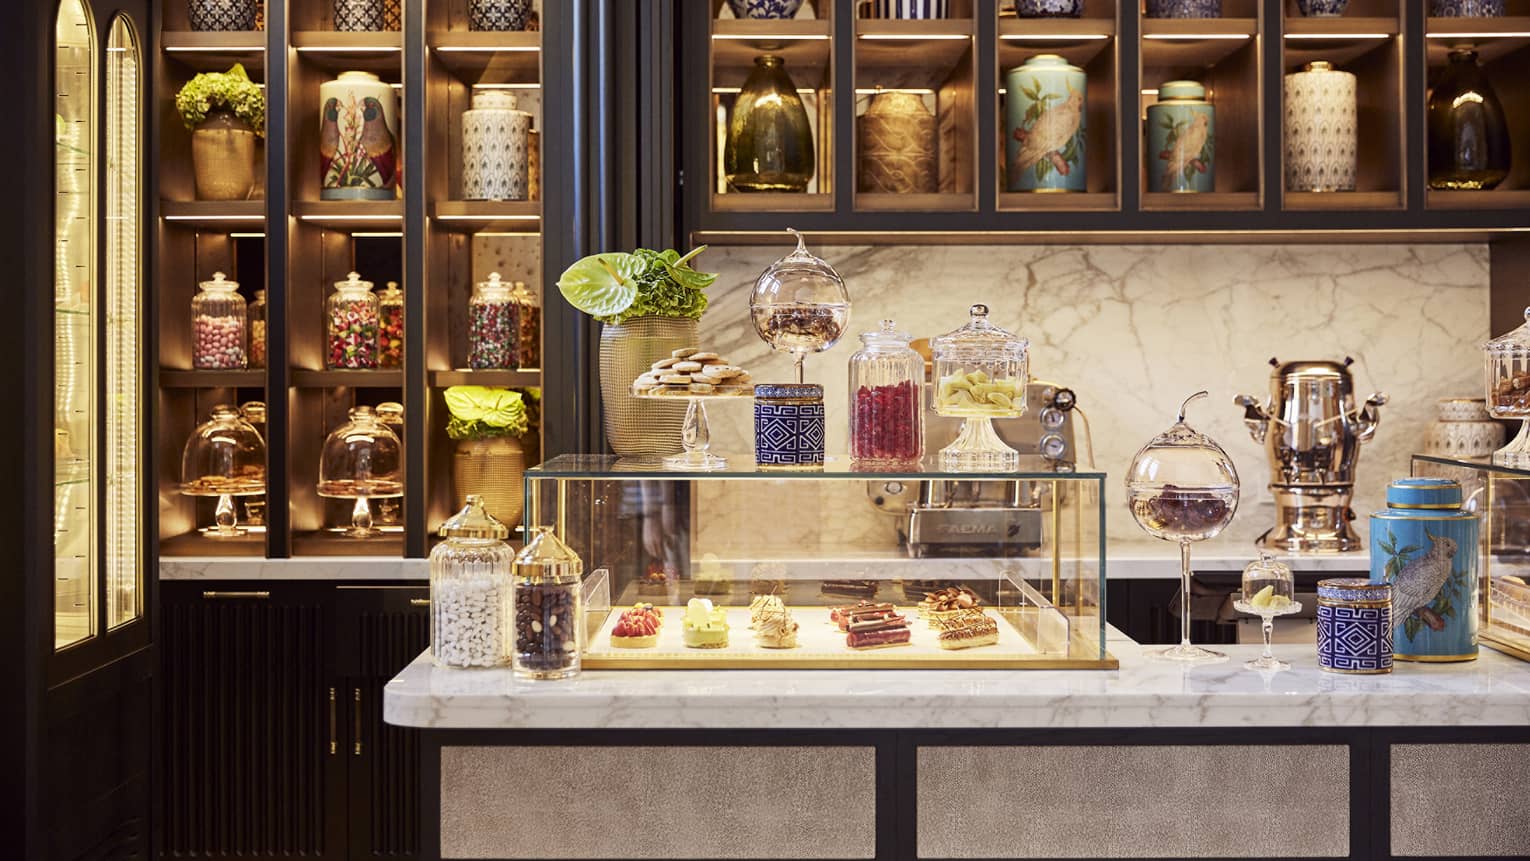 A pastry shop with pastries in a glass case.